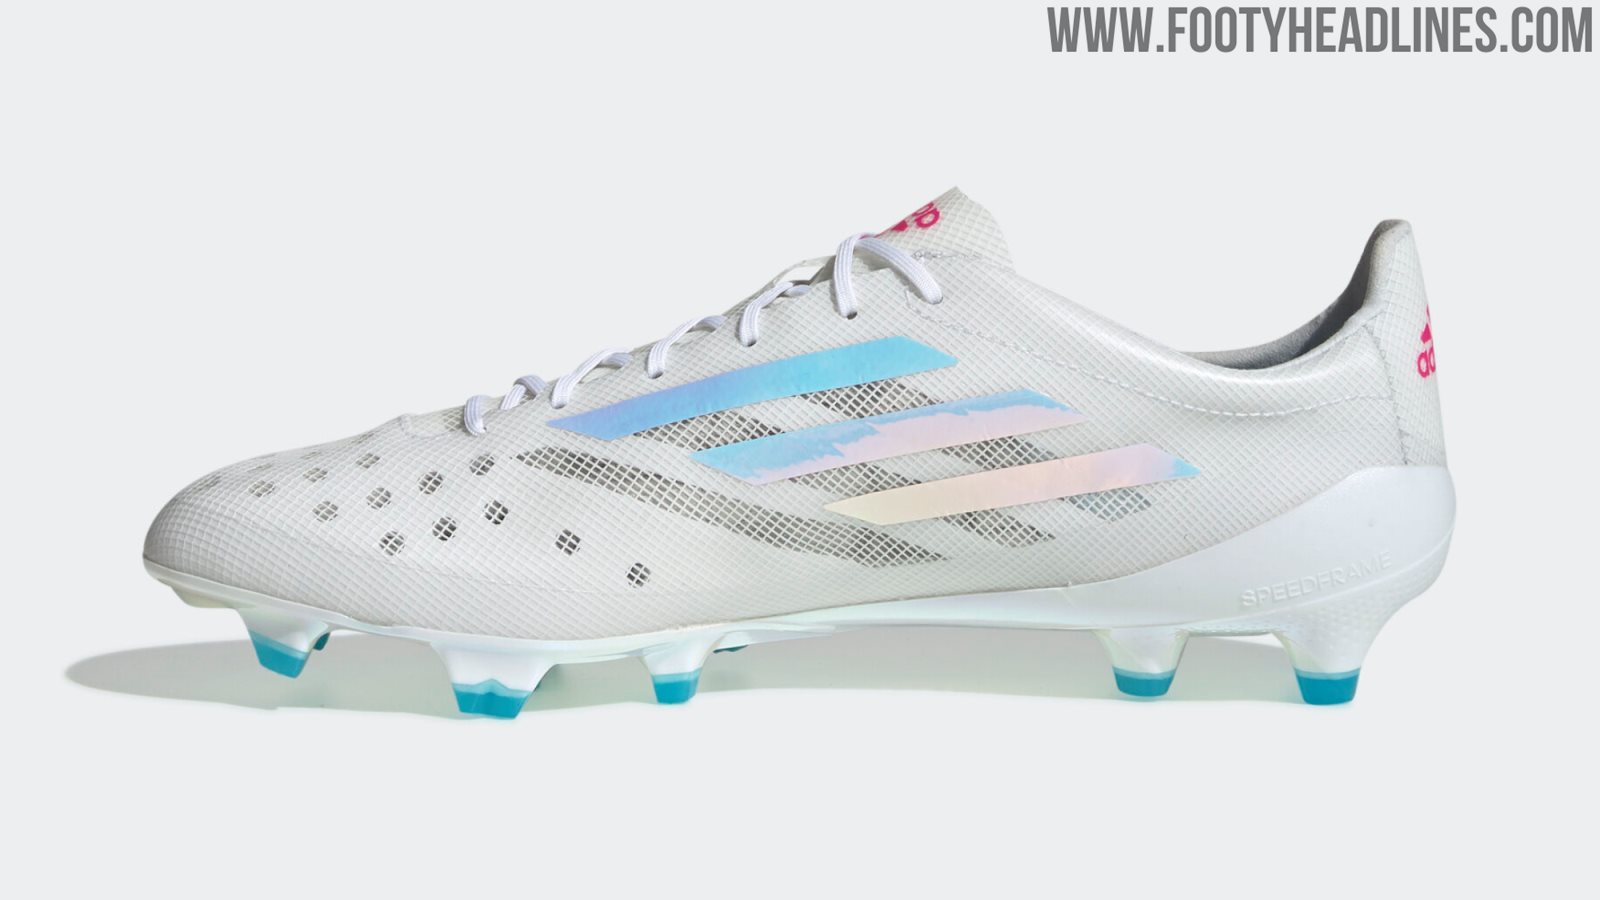 Botánico ligeramente Contable Not Even Close: 2019 "Lightweight" Adidas X 99.1 Boots Weigh Much More Than  99 Grams - Footy Headlines